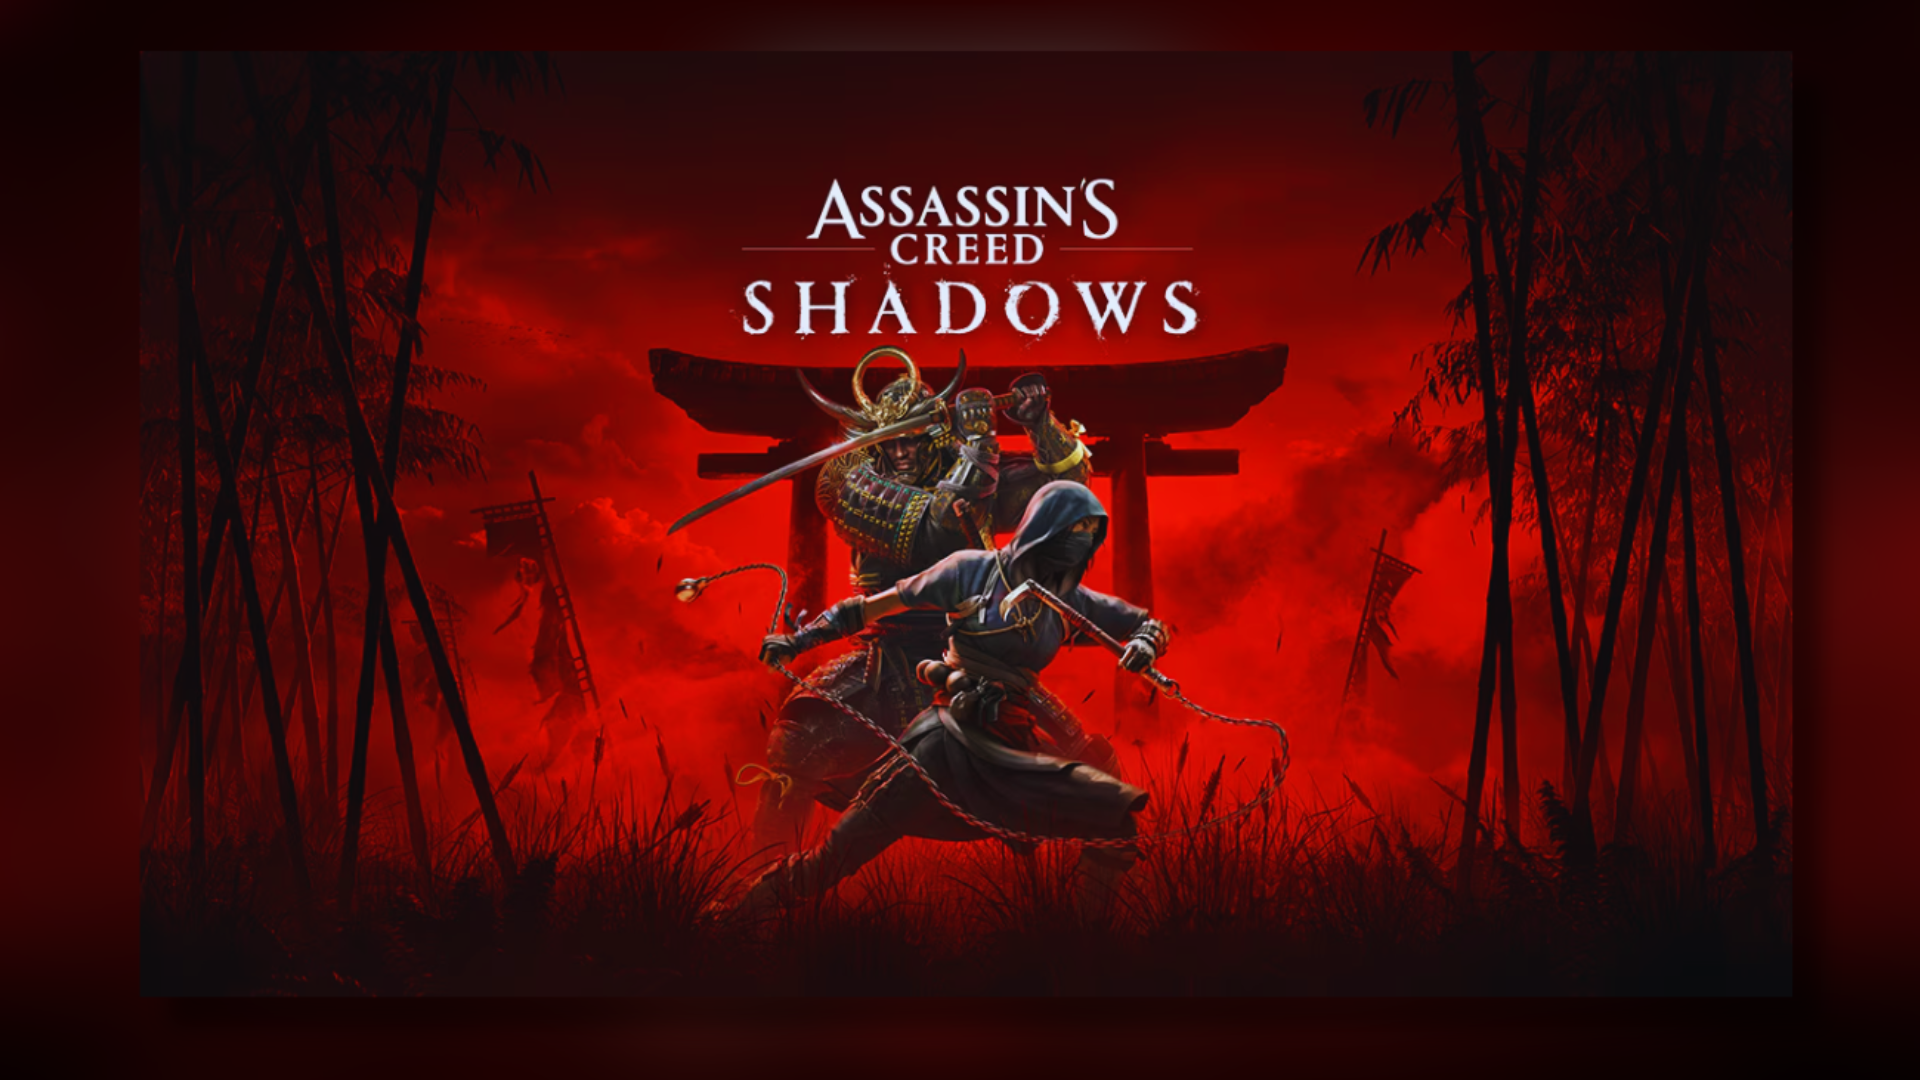 Assassin’s Creed: Shadows Takes Fans On A Feudal Japan Adventure For The First Time! – Release Date And Exciting Gameplay Details Revealed